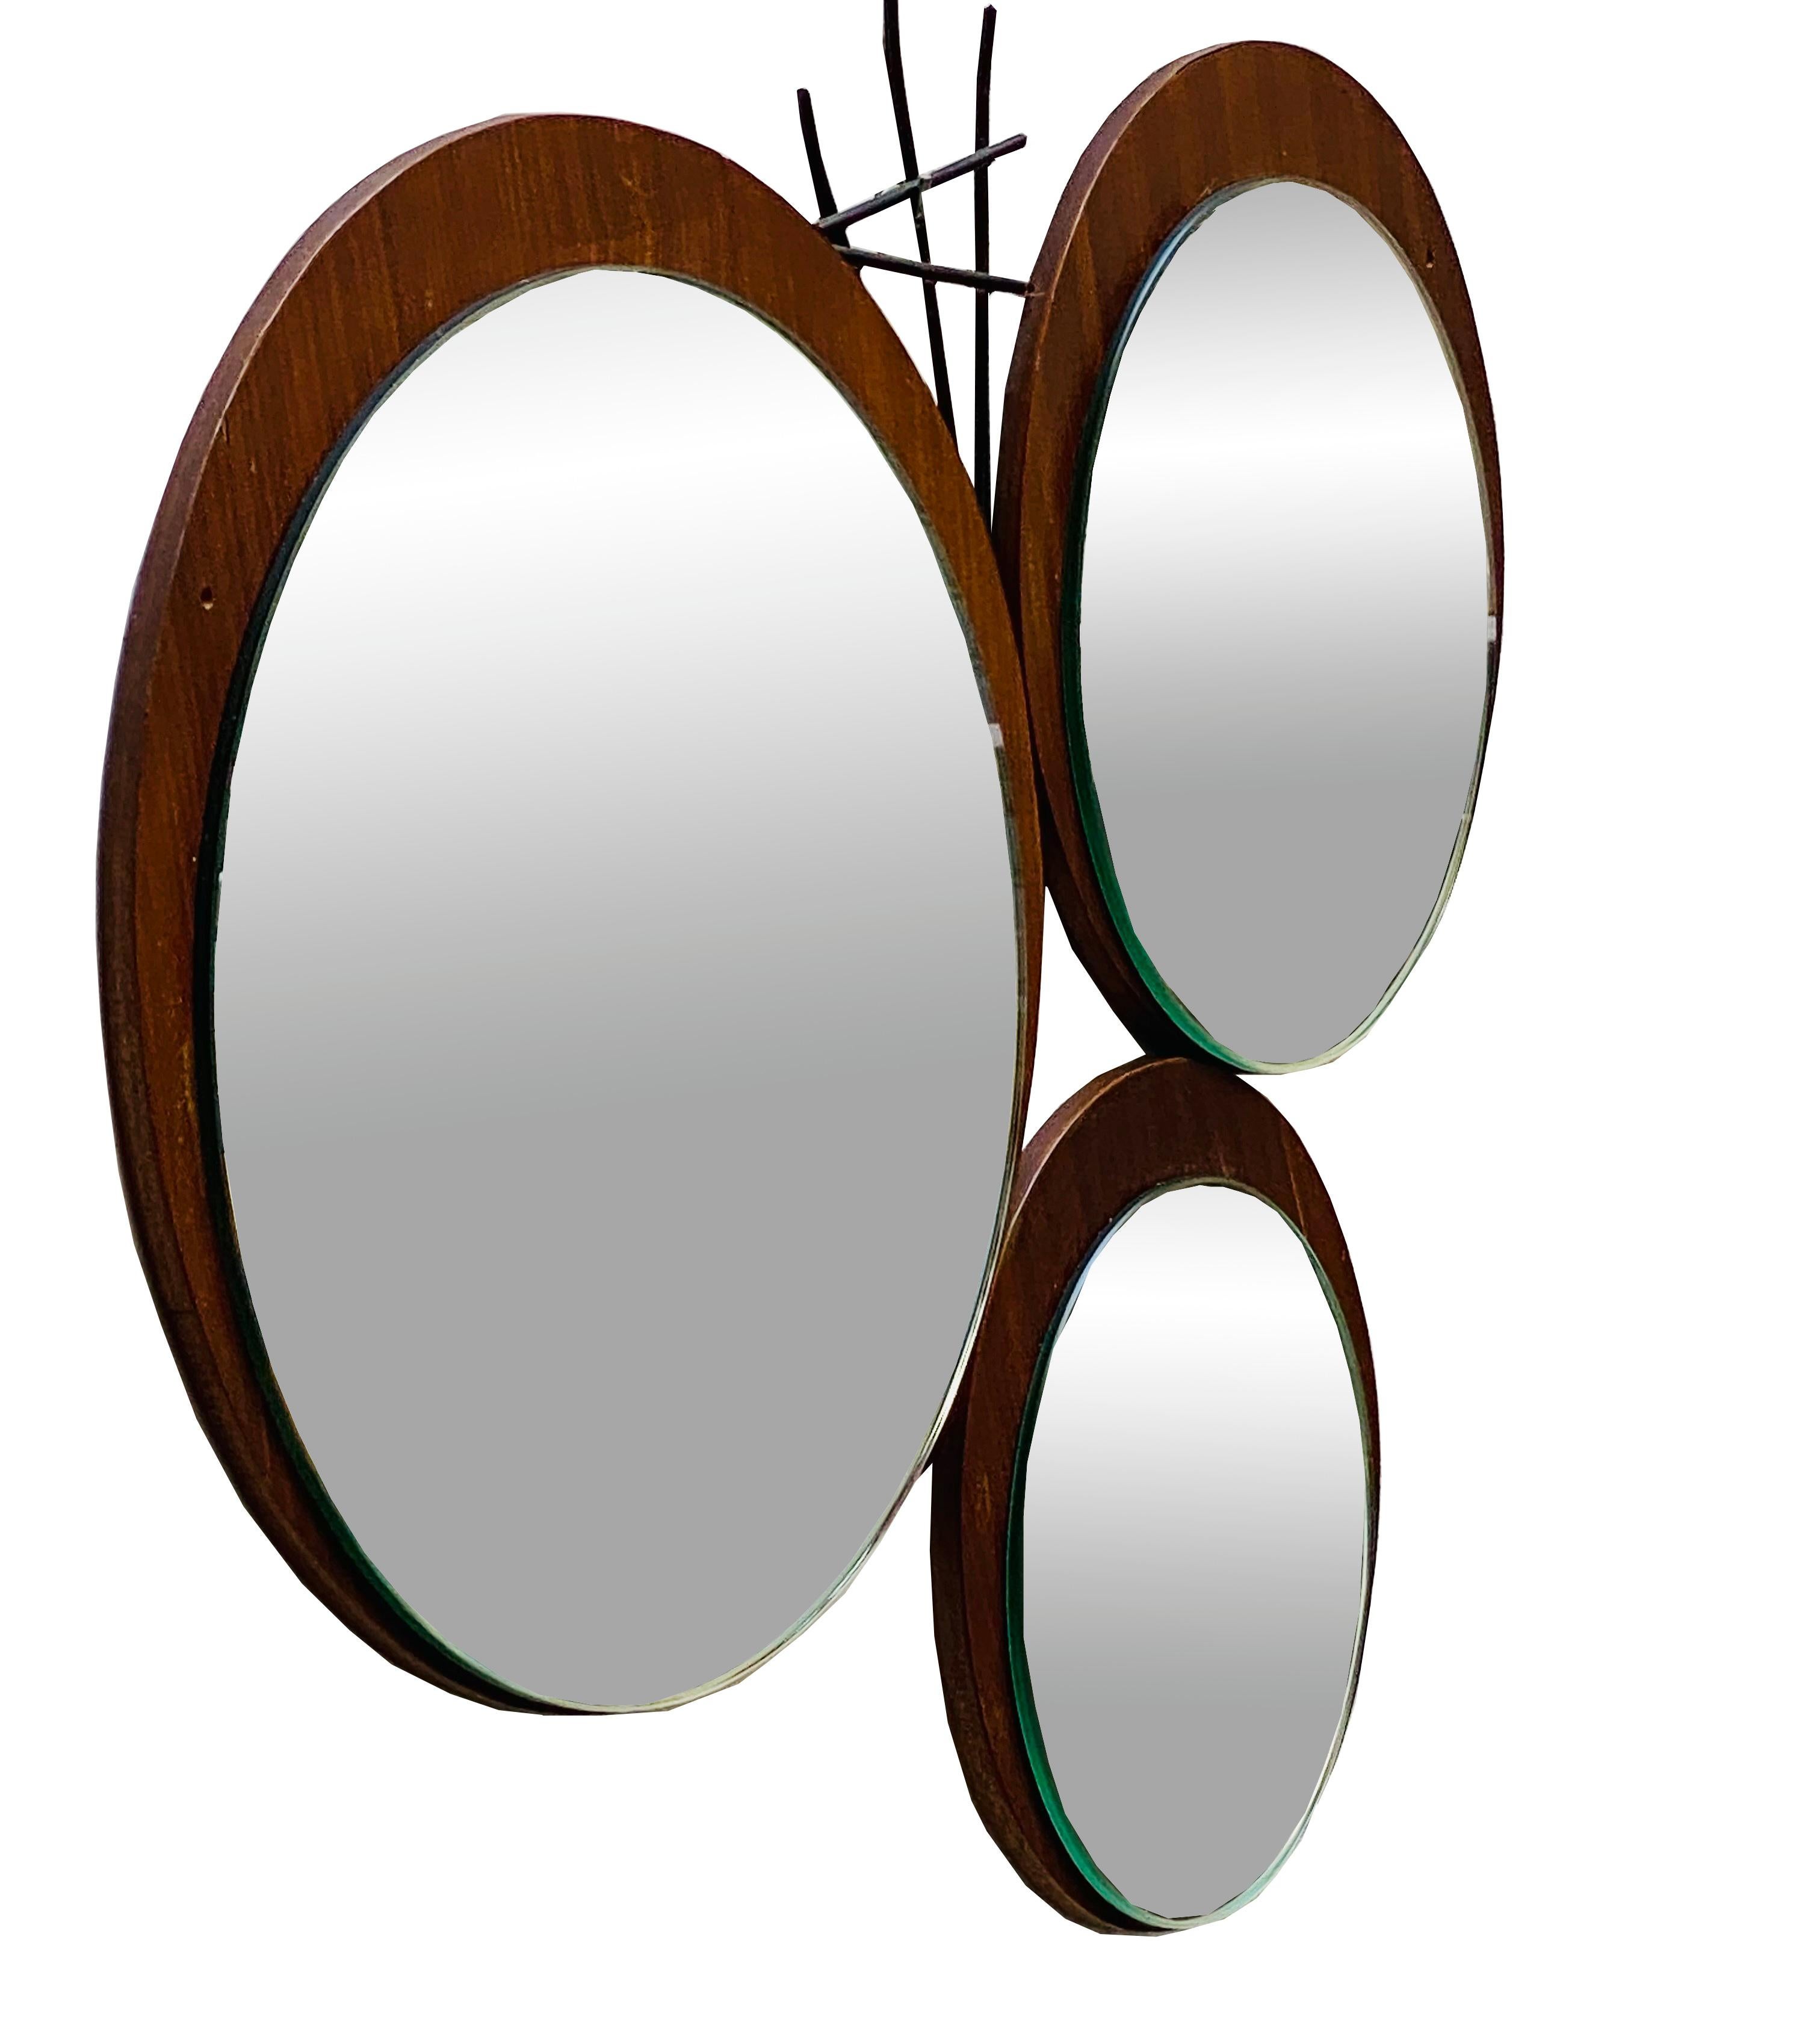 Unique wall mirror with three panes of glass mounted on a teak wood base and wrought iron insert, Italian production 1960. Small holes in the wood visible in photo.



